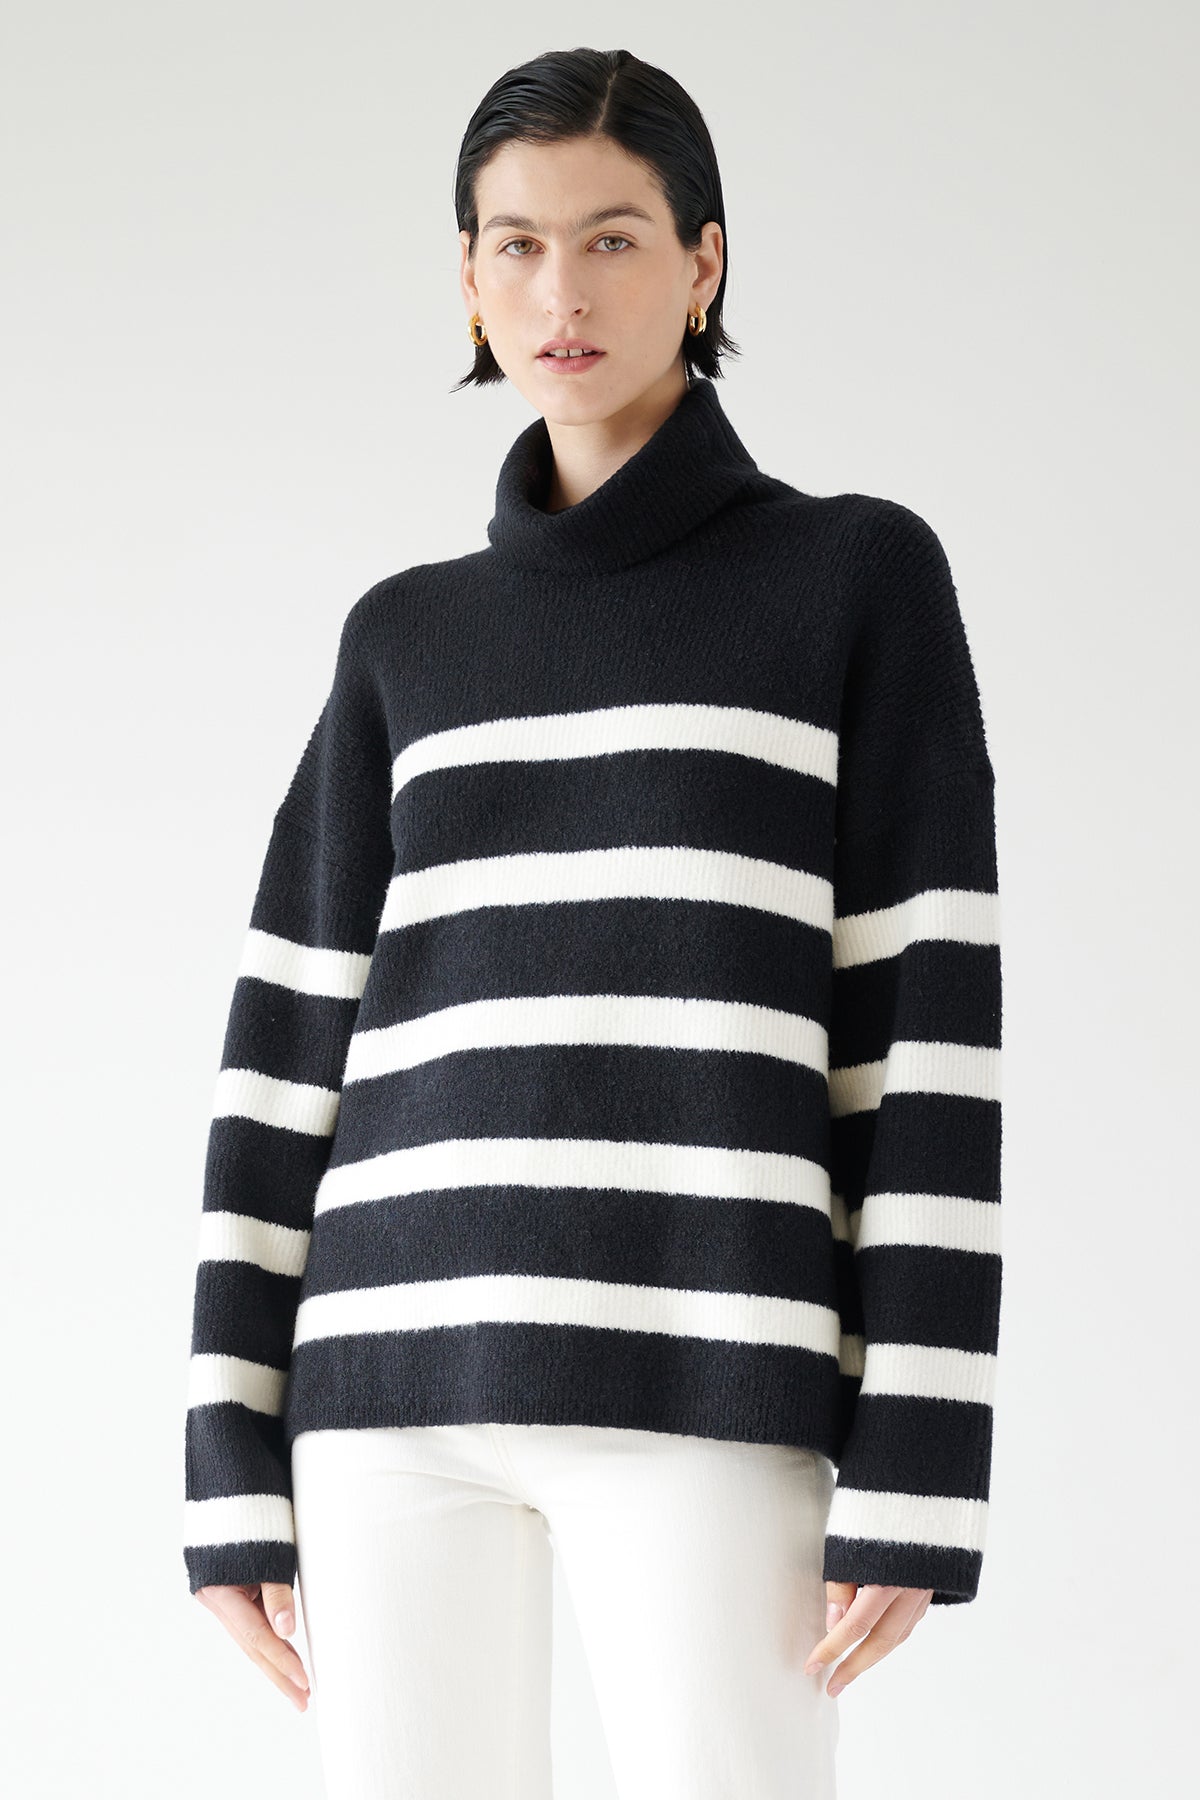 A woman wearing an oversized ENCINO SWEATER by Velvet by Jenny Graham.-35547909947585